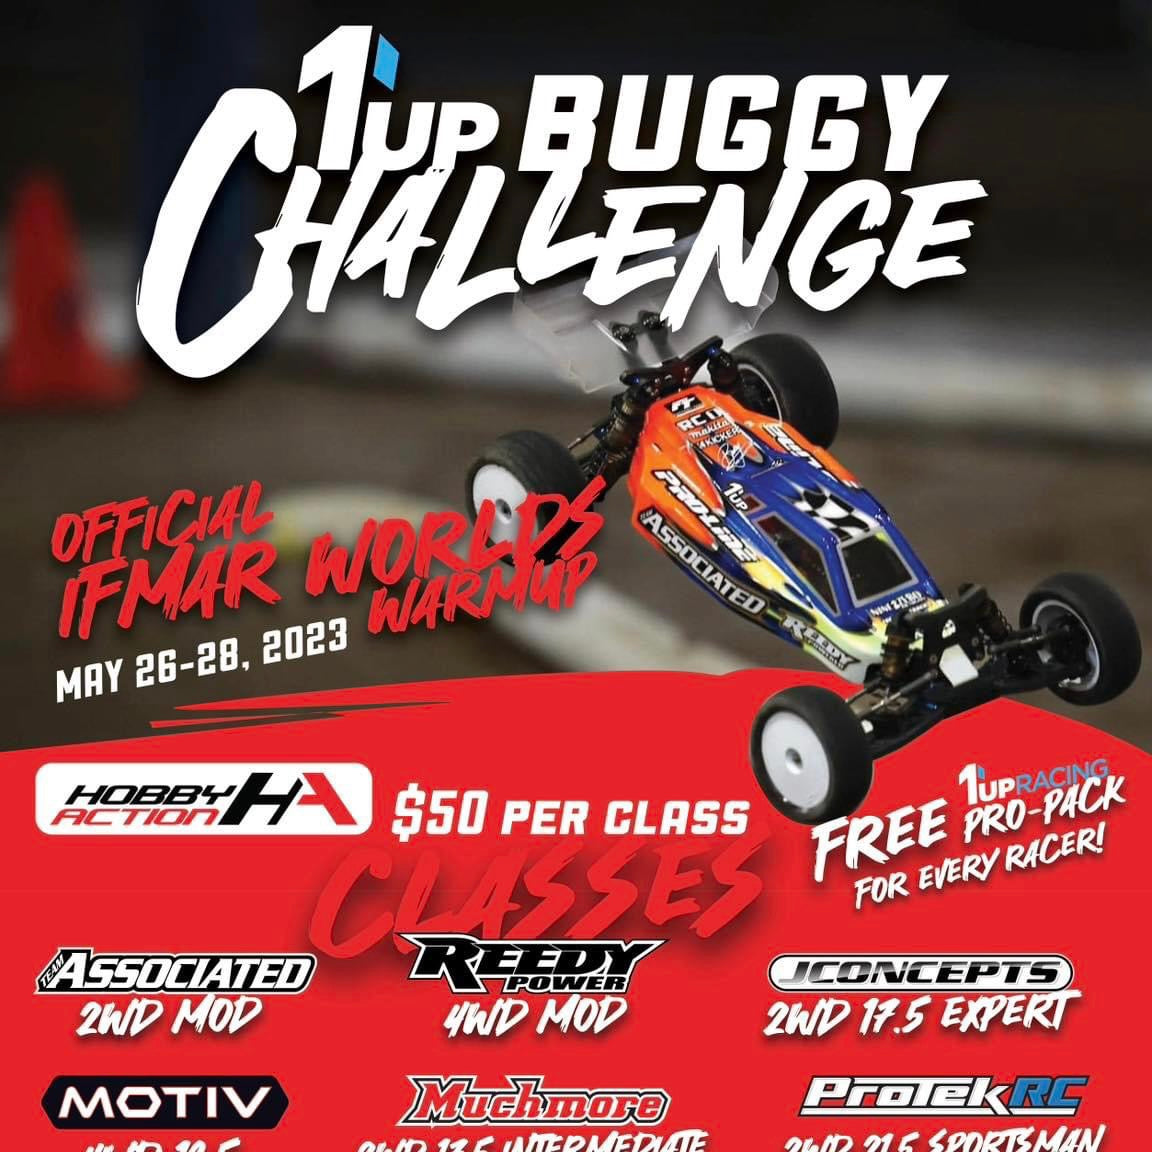 1up Buggy Challenge/Worlds Warm Up Information